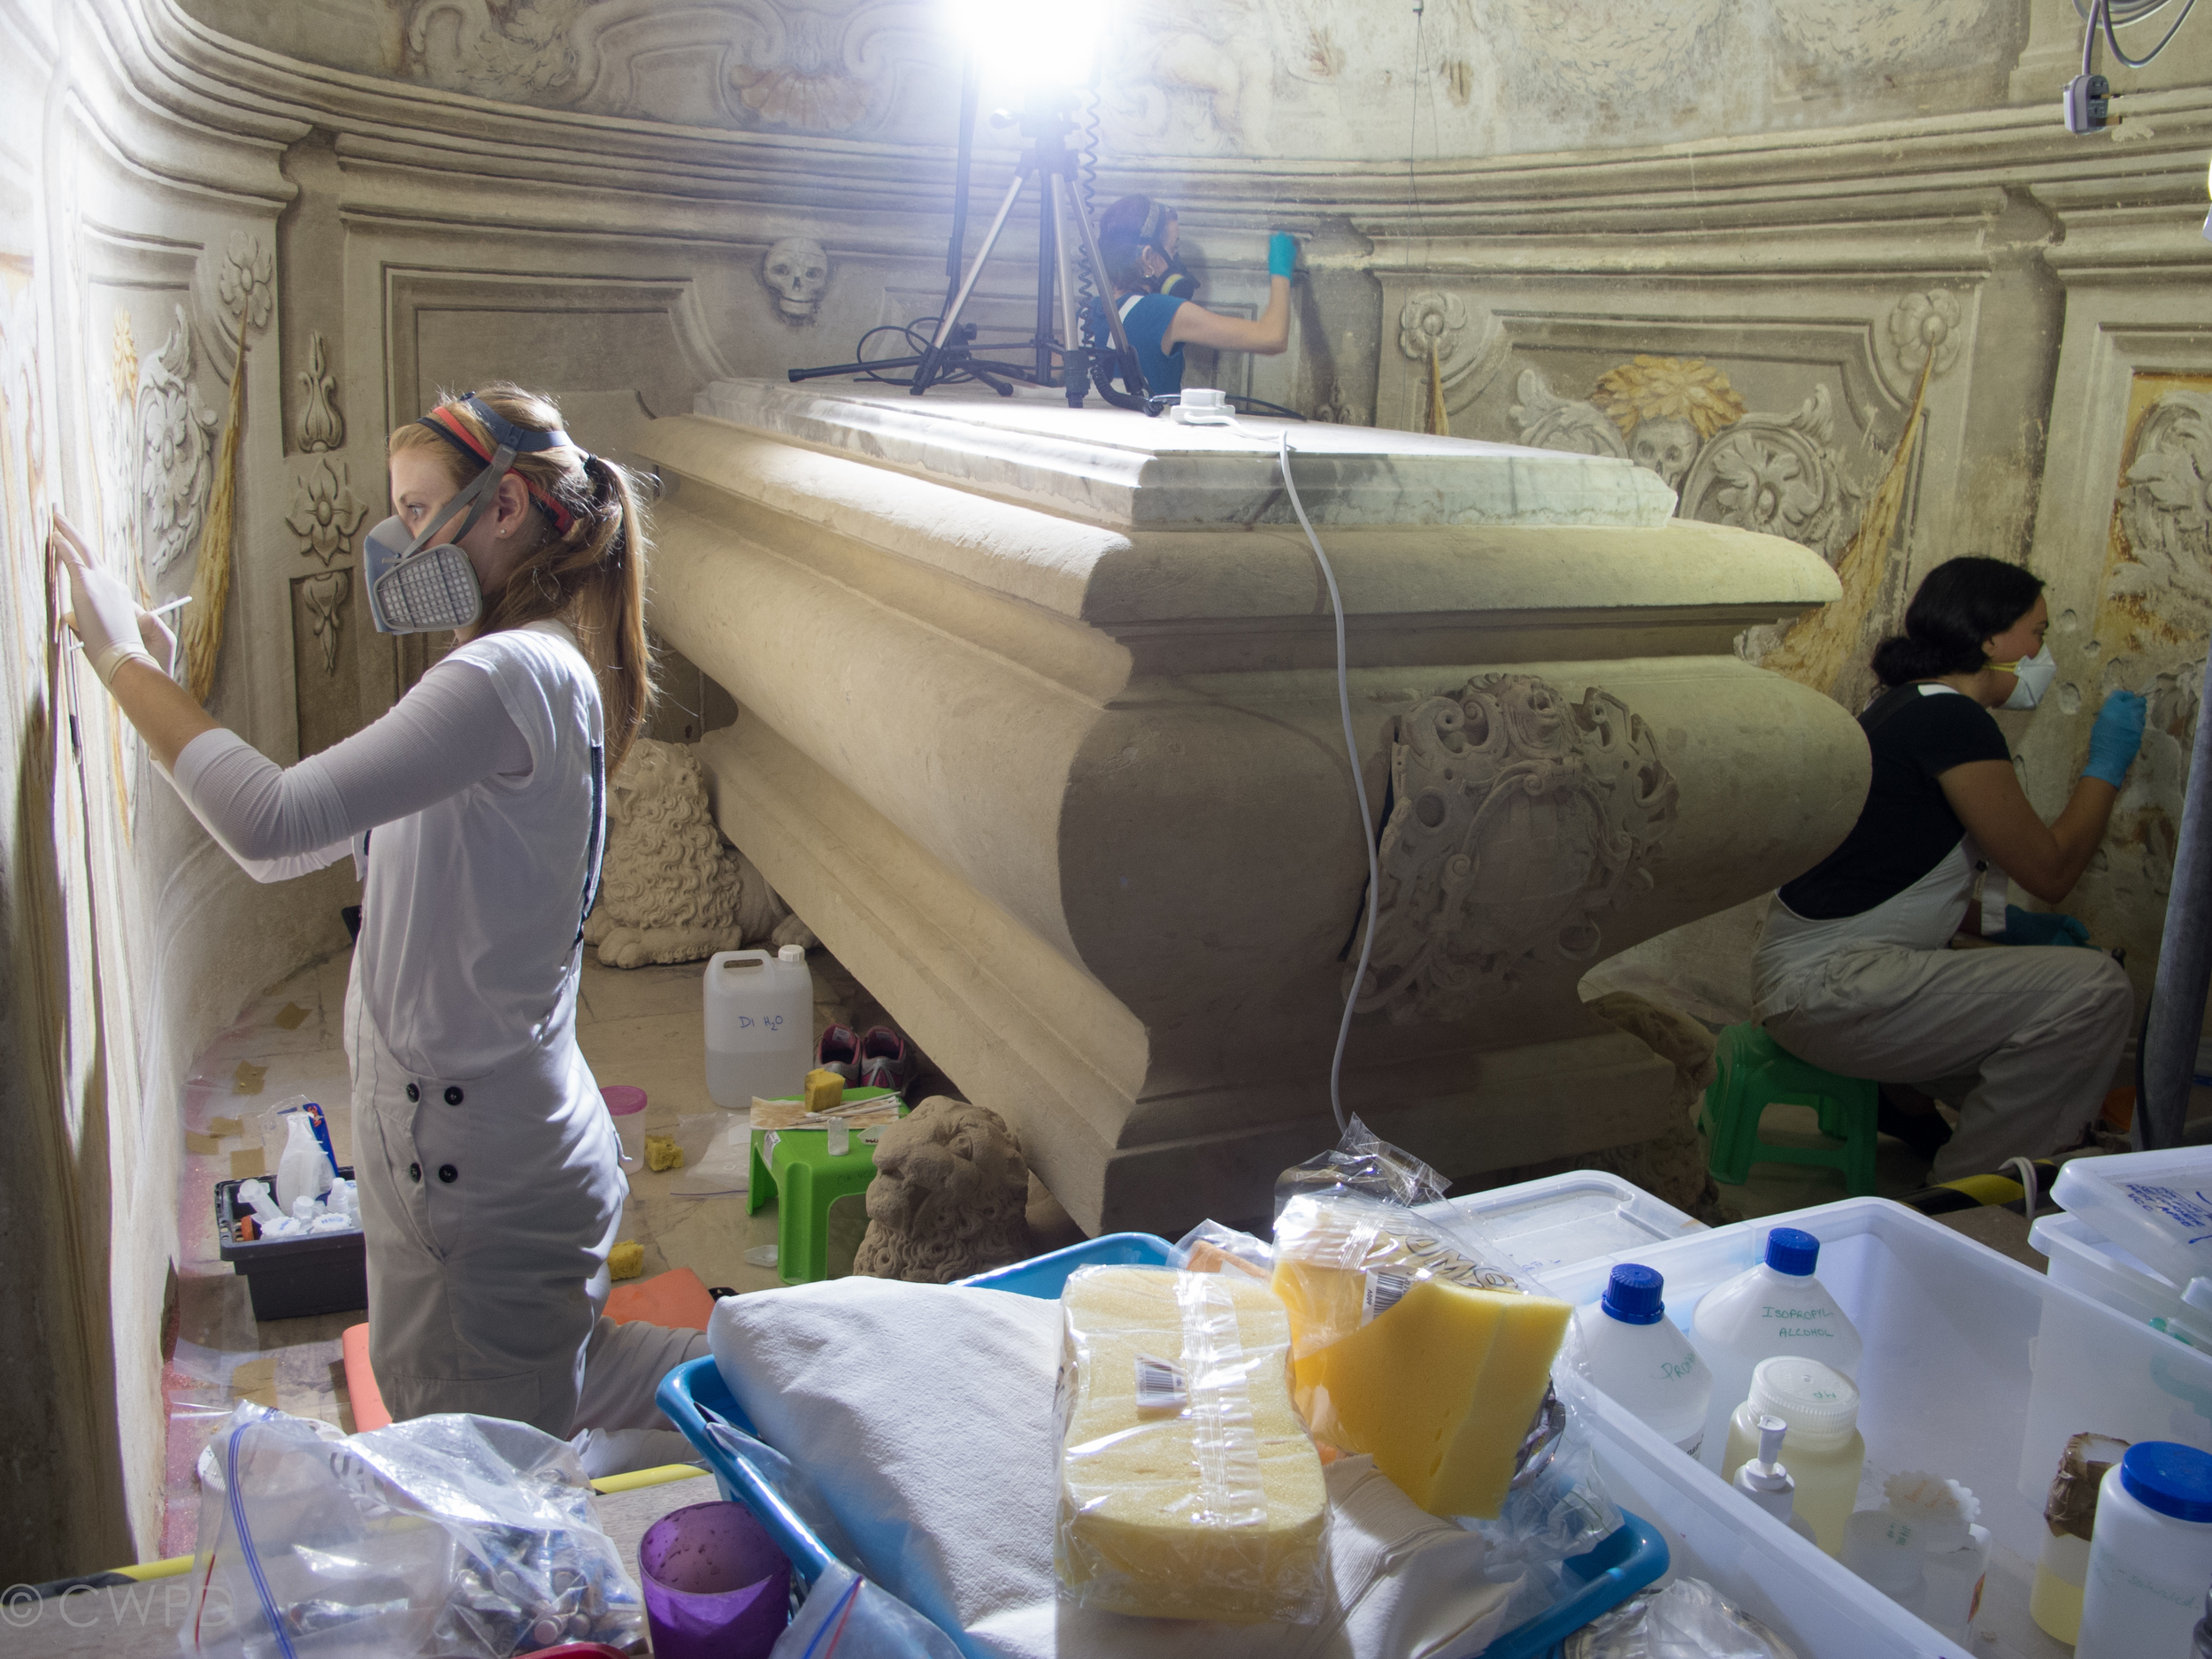  Salt efflorescence, loose dirt, and microbiological growth were cleaned from the wall paintings by dry dusting with paint brushes and carefully wiping with damp sponges.&nbsp;  Image © Courtauld CWPD 